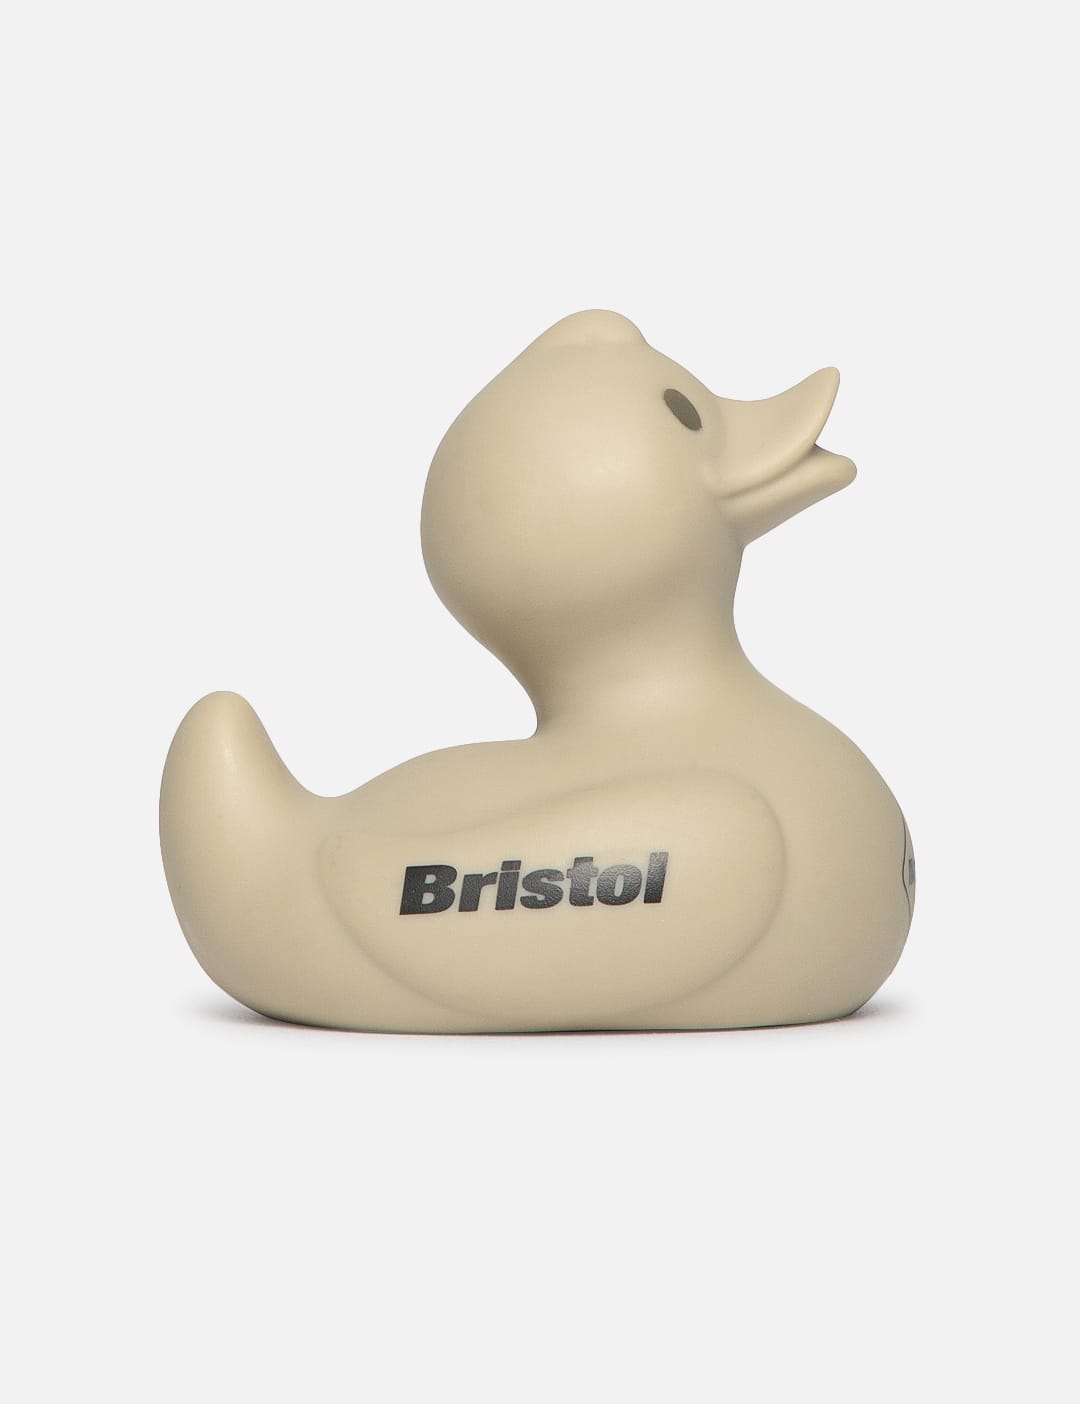 F.C. Real Bristol - RUBBER DUCK | HBX - Globally Curated Fashion 